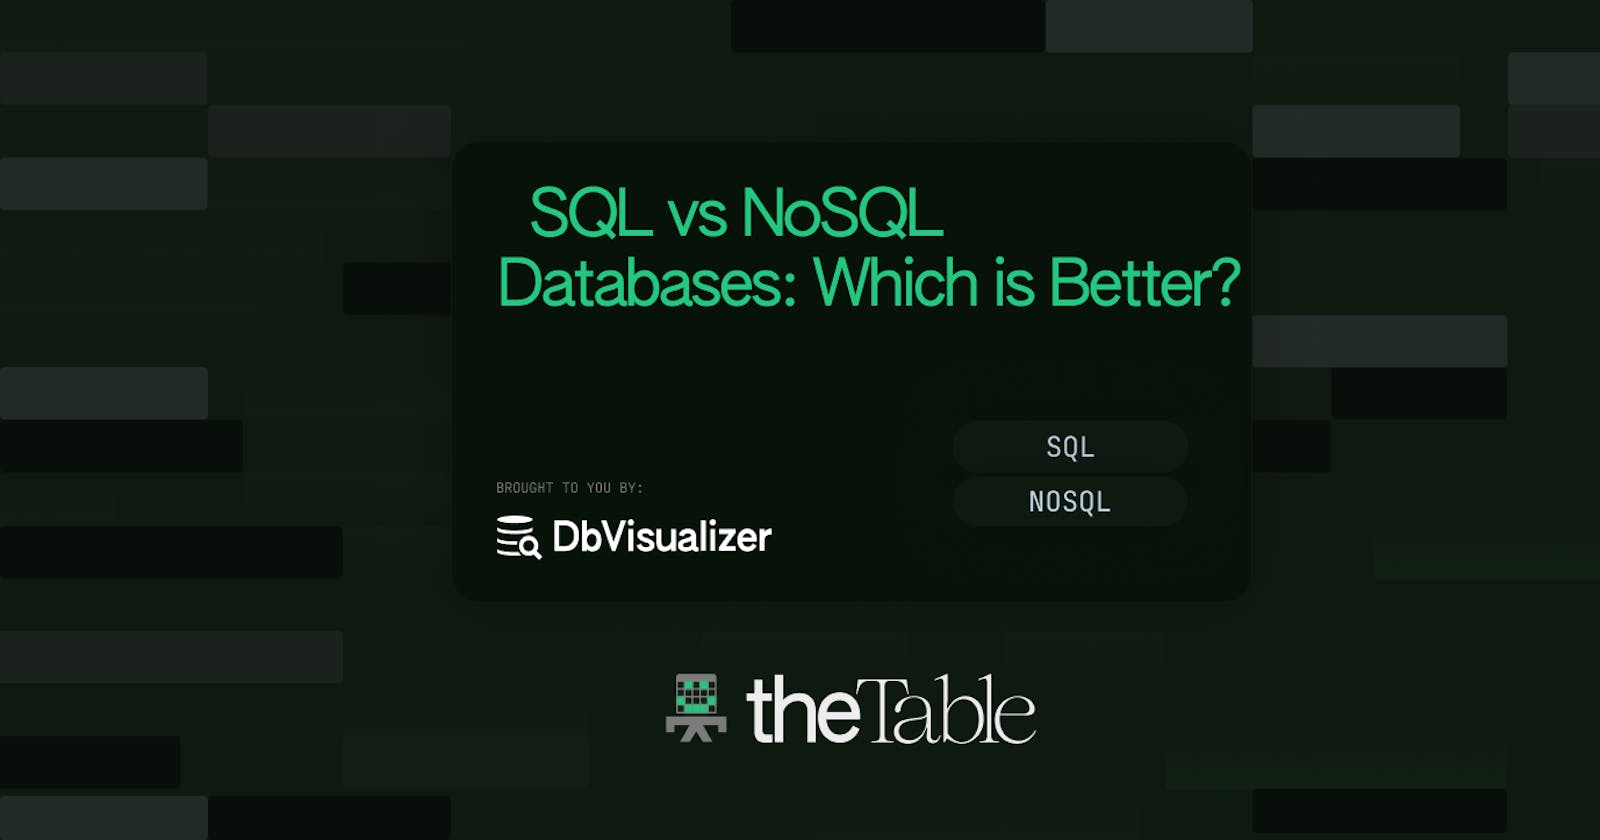 SQL vs NoSQL Databases: Which is Better?